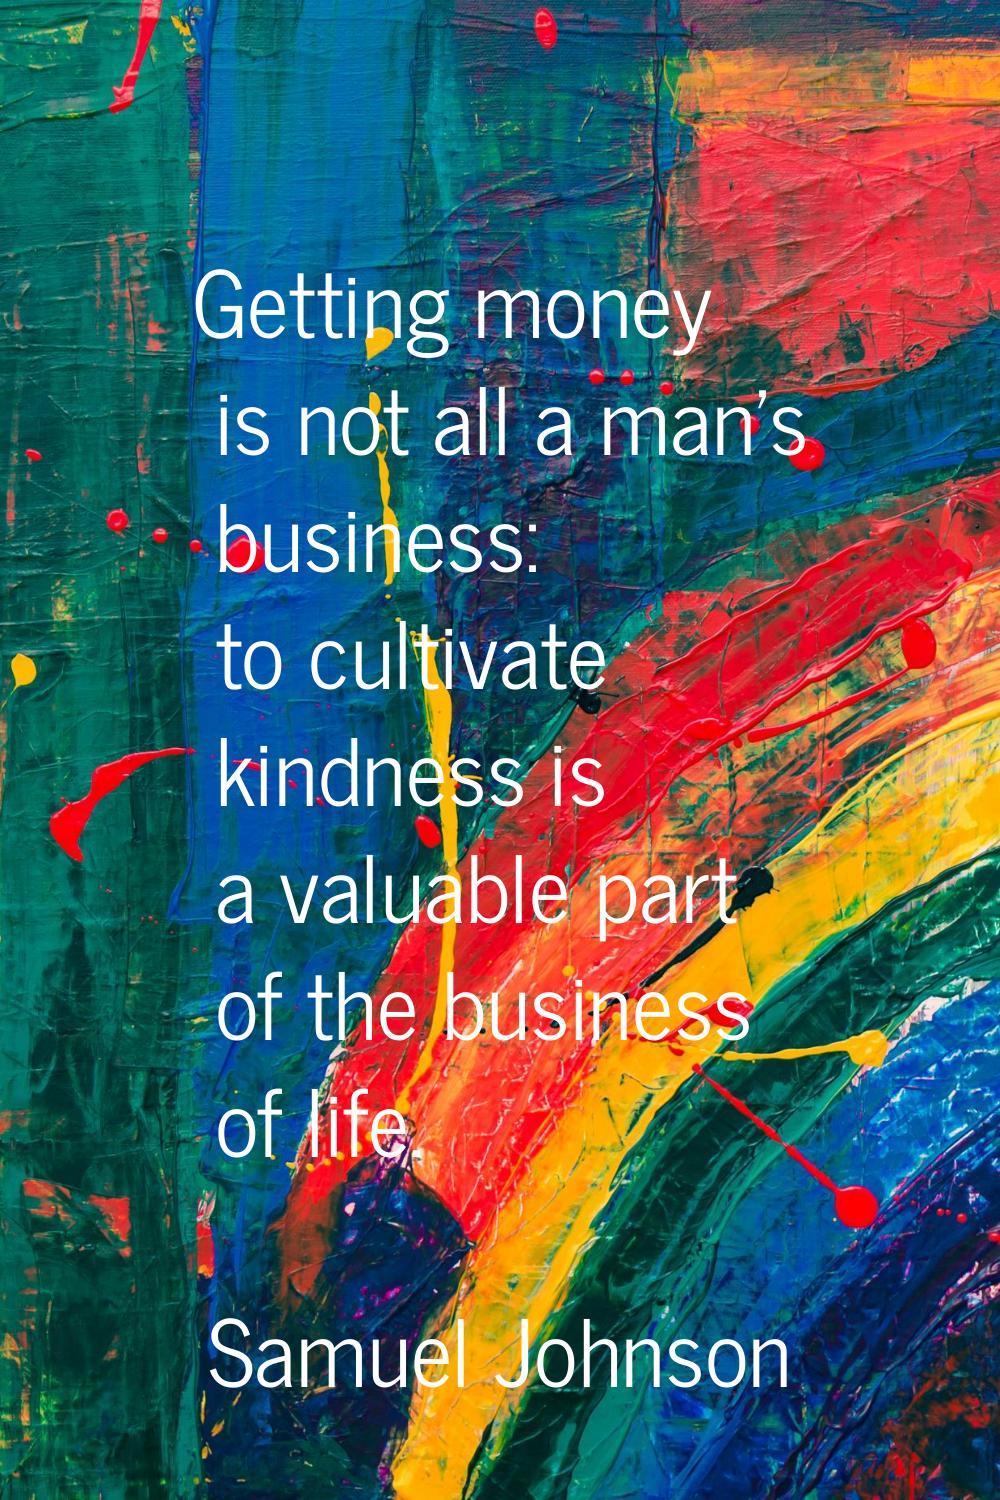 Getting money is not all a man's business: to cultivate kindness is a valuable part of the business